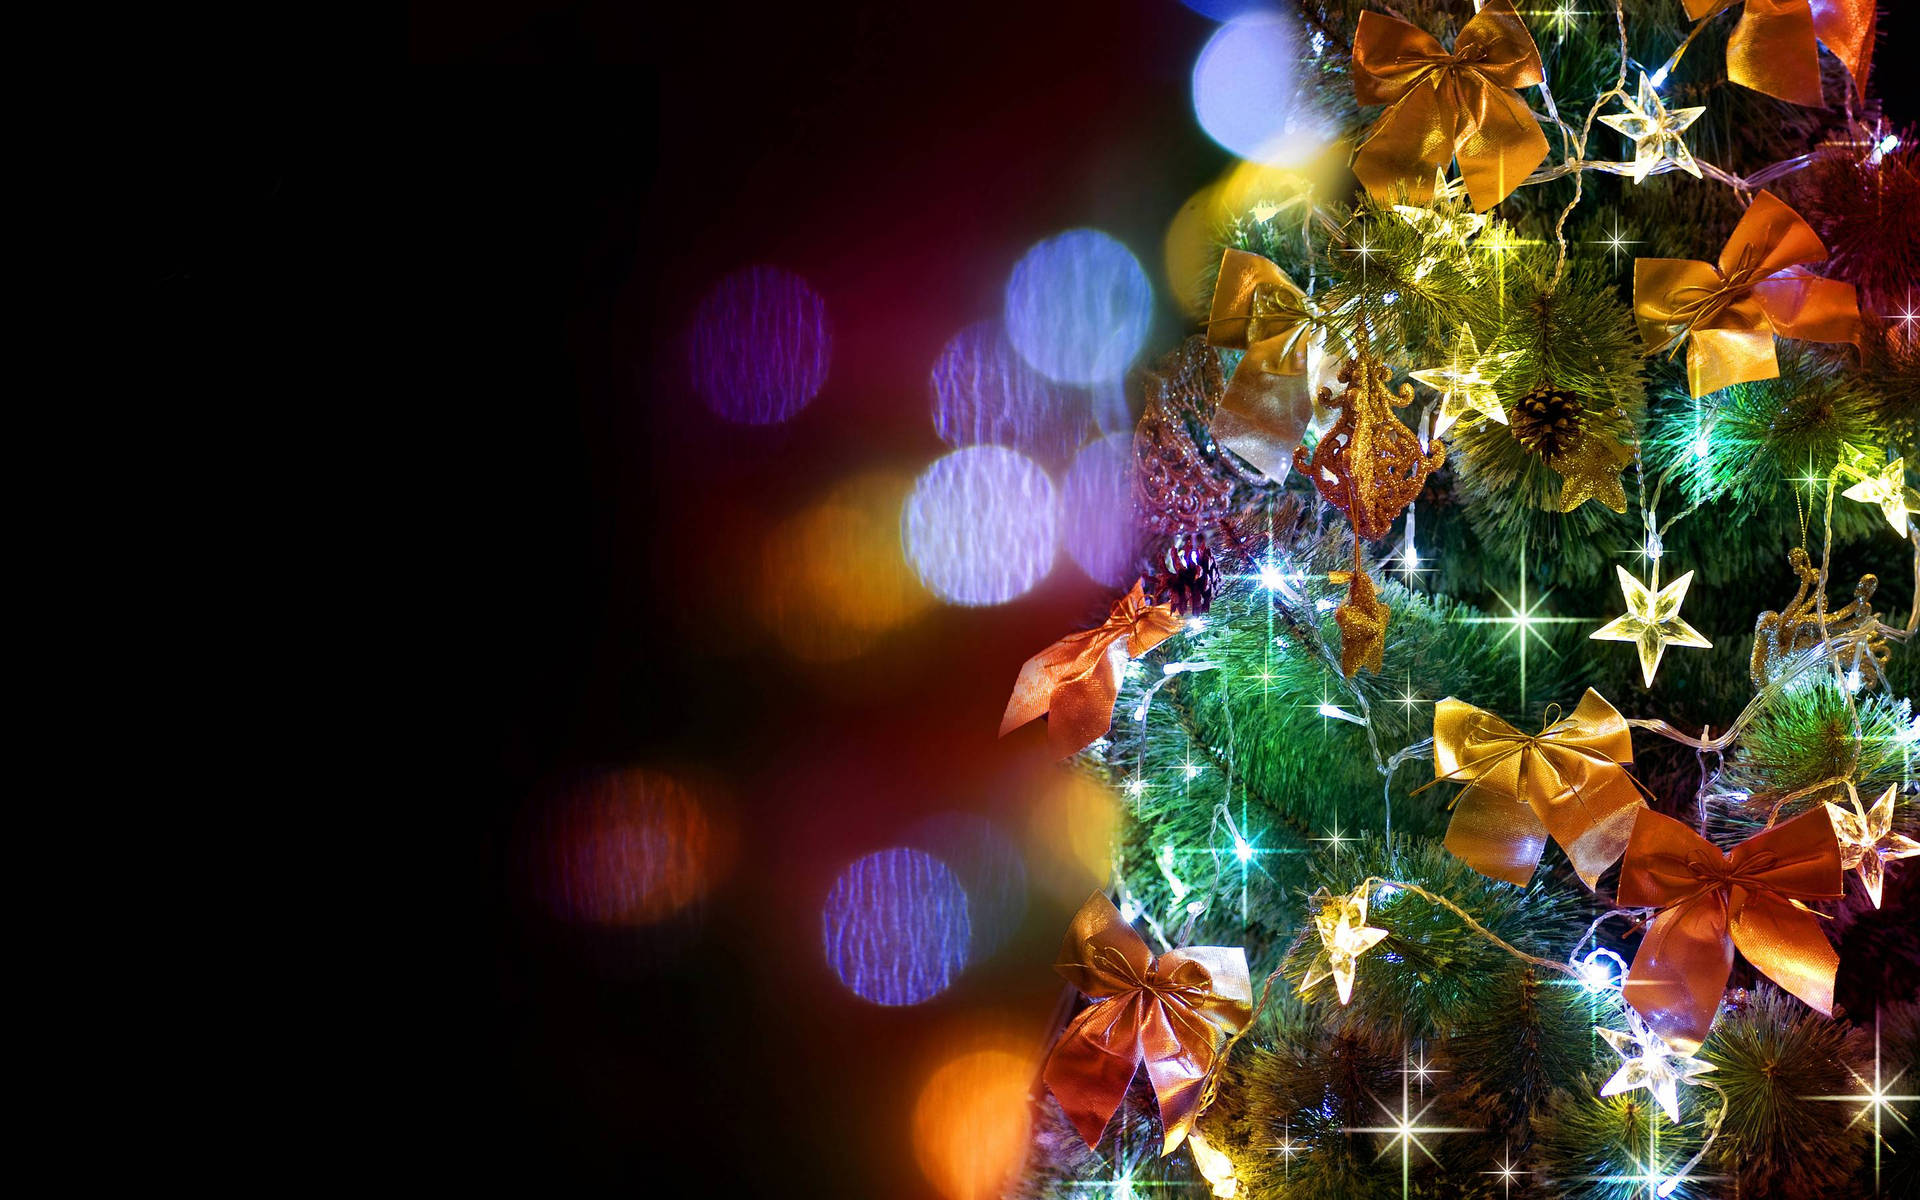 Light up your holiday spirit with these dazzling Christmas Tree lights Wallpaper